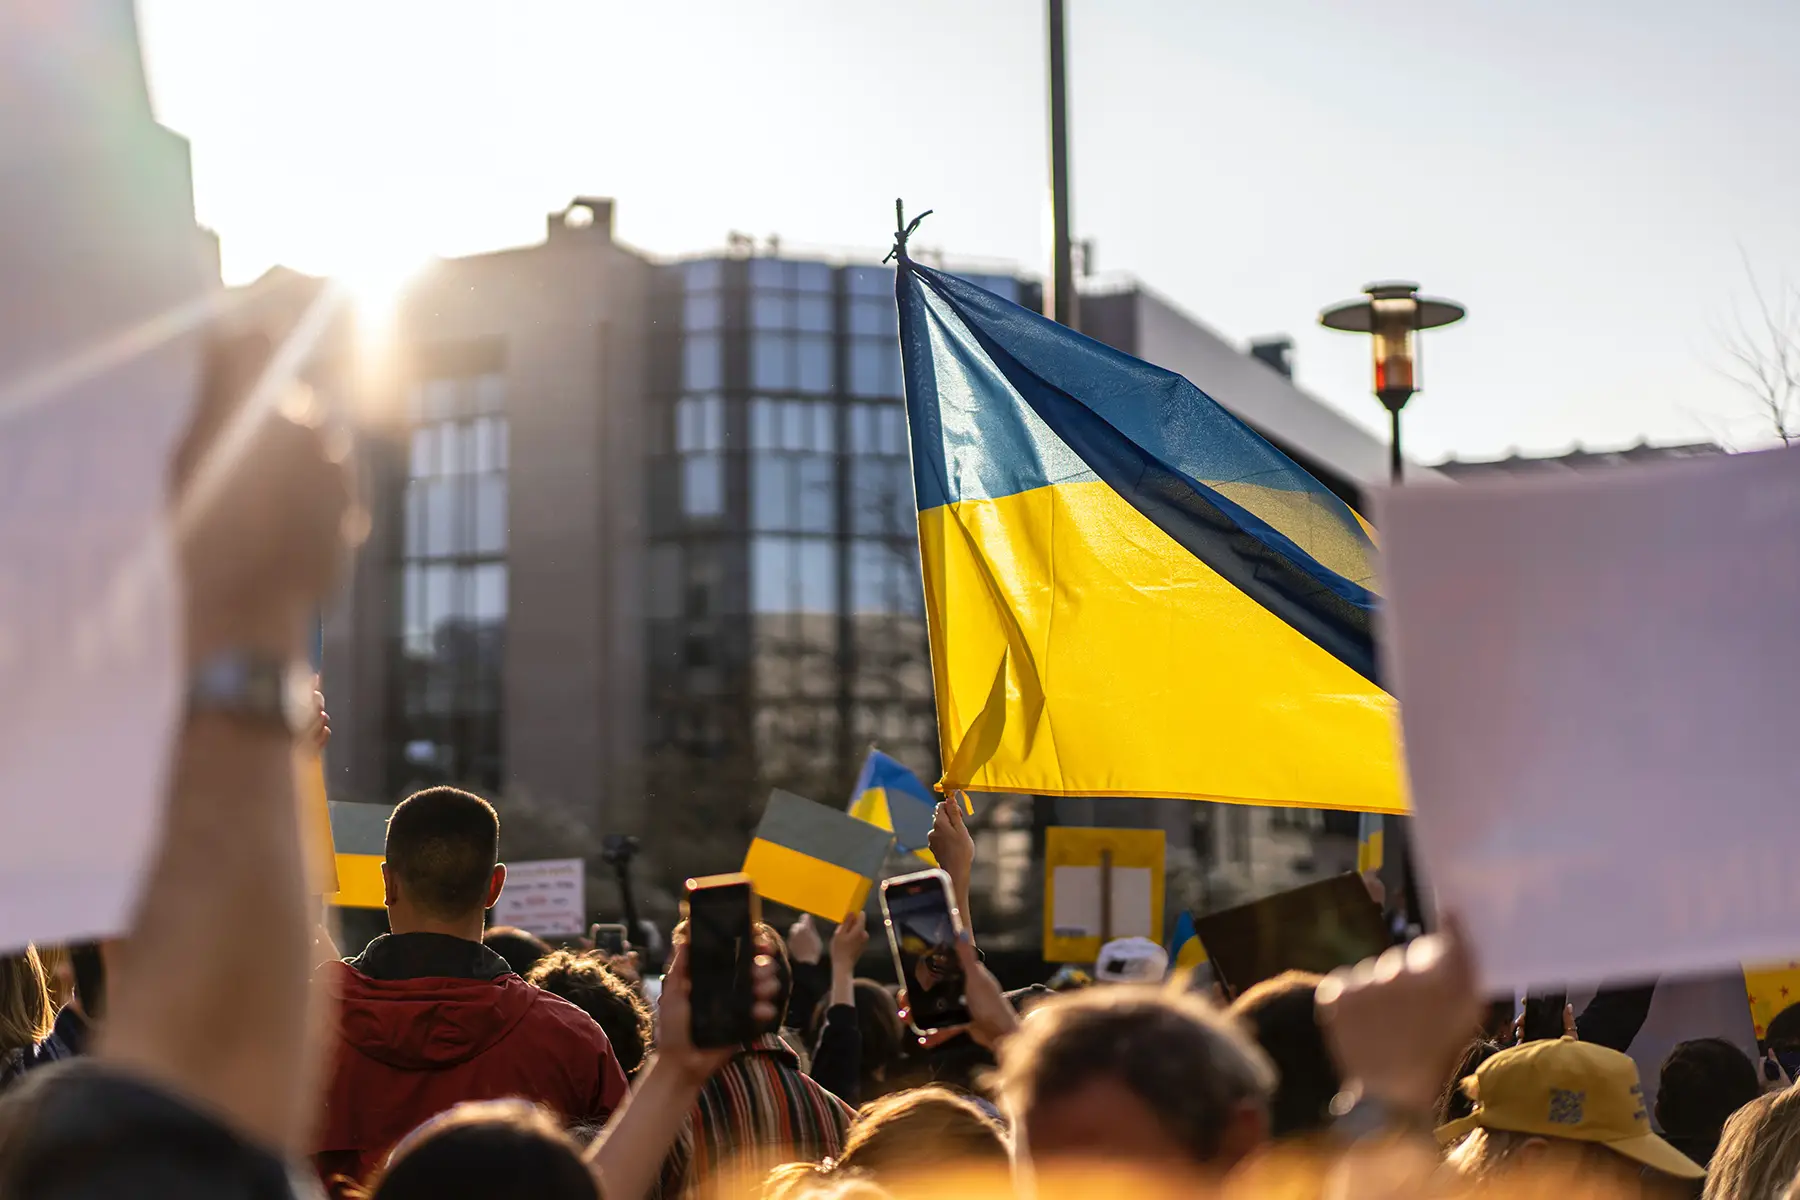 A crowd holding Ukraine flags protests outside a glass building